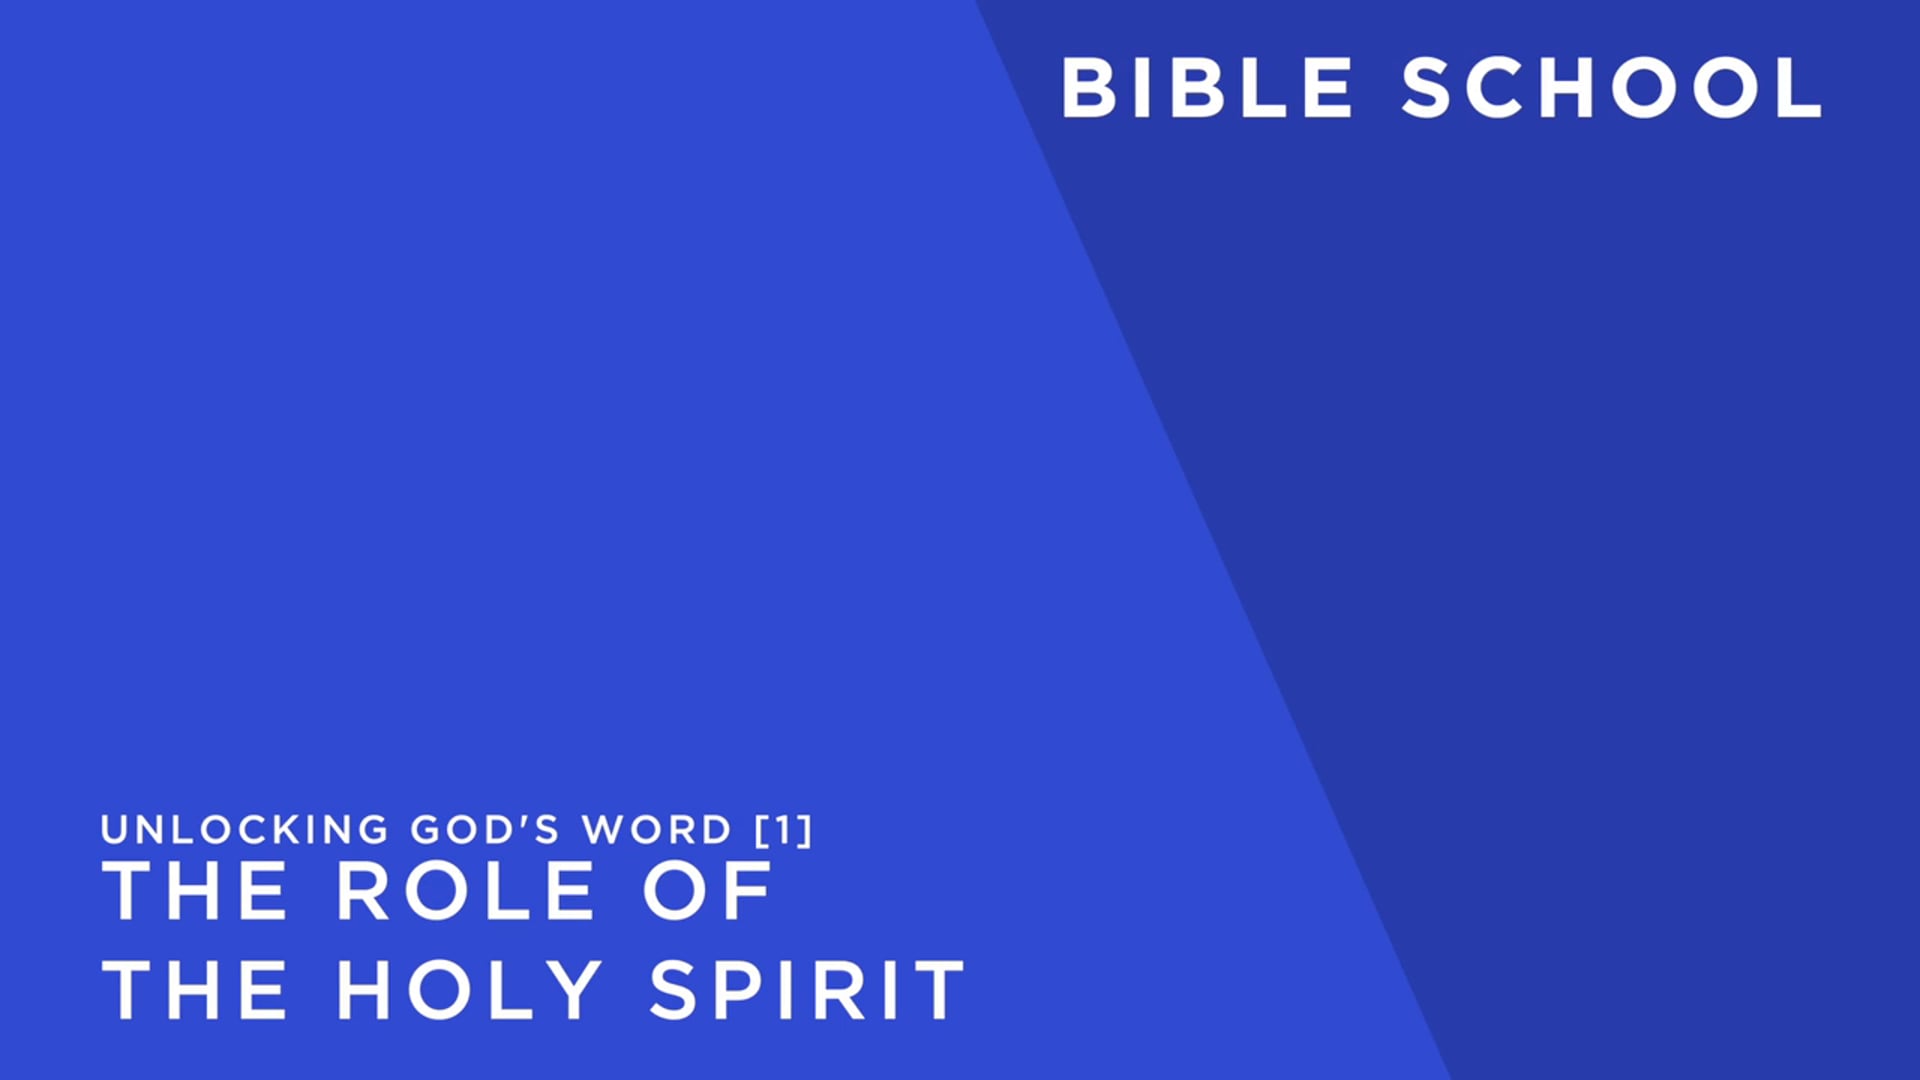 UNLOCKING GOD'S WORD 1 The Role of the Holy Spirit